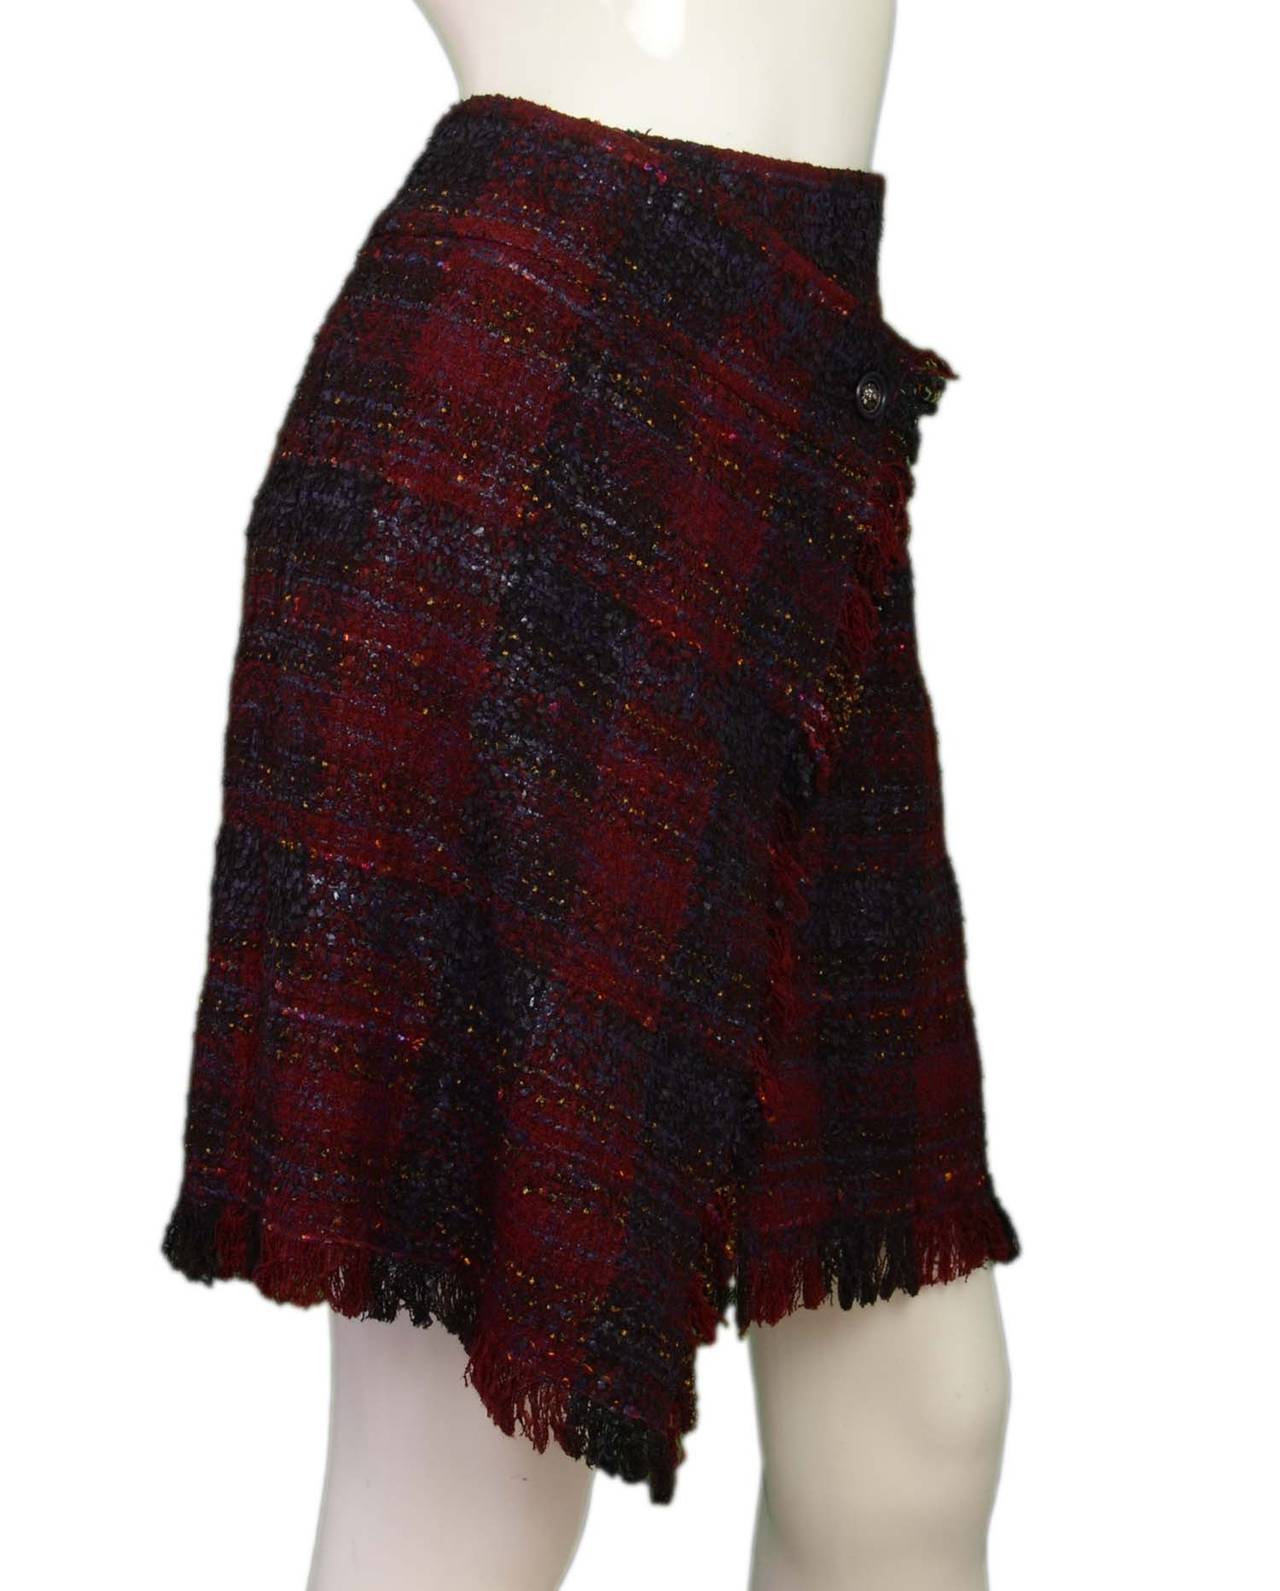 Features tweed trim and single Chanel lion head button

-Made in: Italy
-Year of Production: After 2010
-Color: Red, blue, with some minor yellow accents
-Composition: 63% wool, 35% nylon, 1 polyester, 1% rayon
-Tags: CHANEL CC
-Lining: 100%